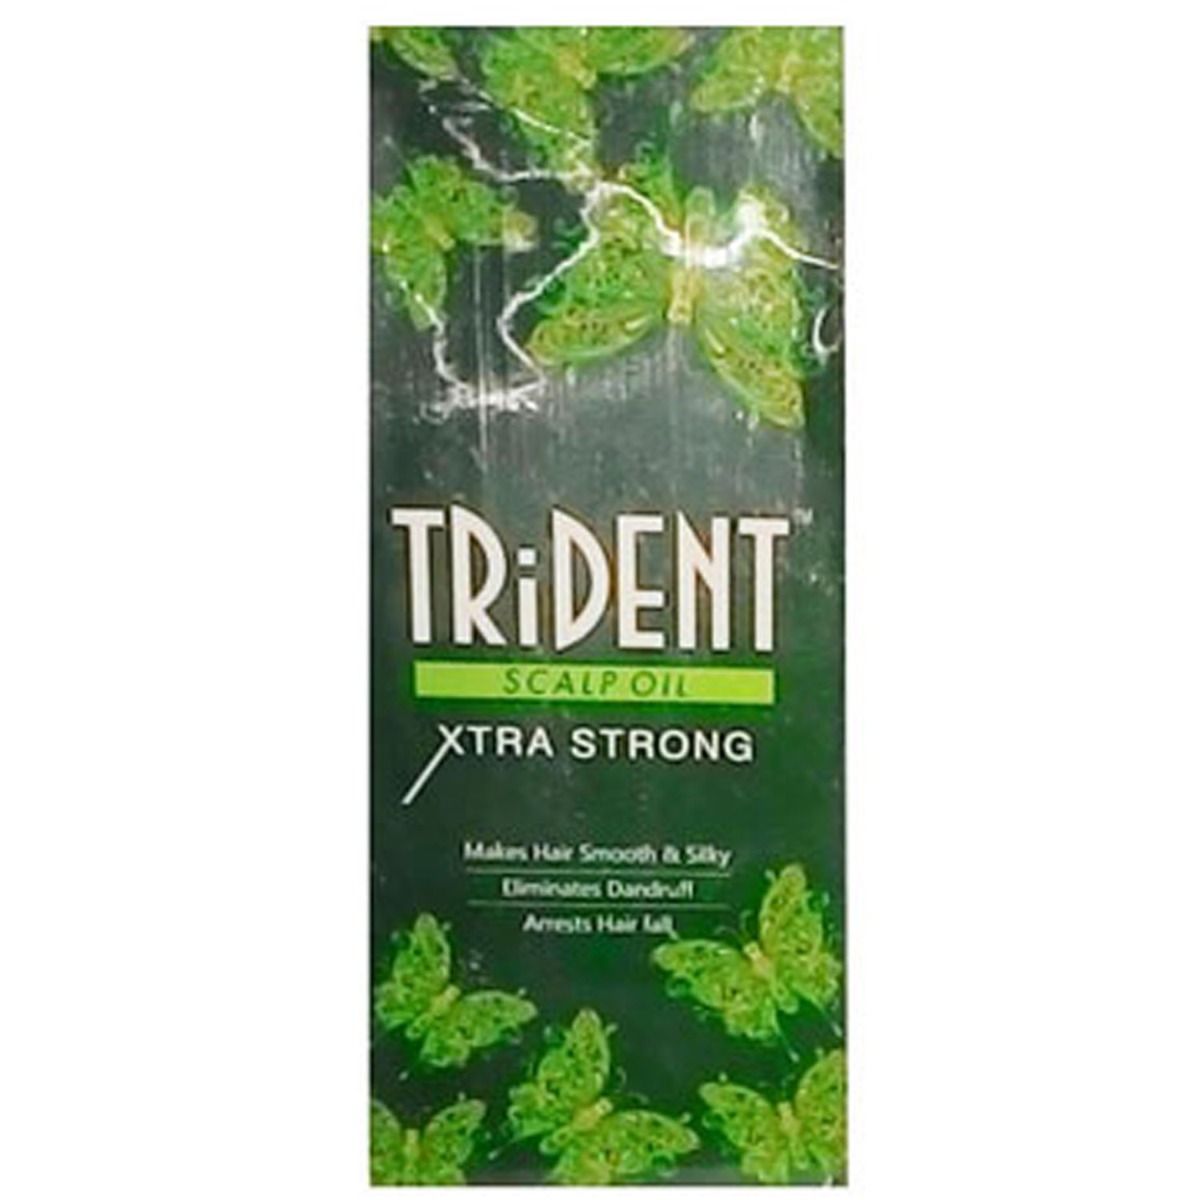 Trident Xtra Strong Scalp Oil, 140 ml, Pack of 1 